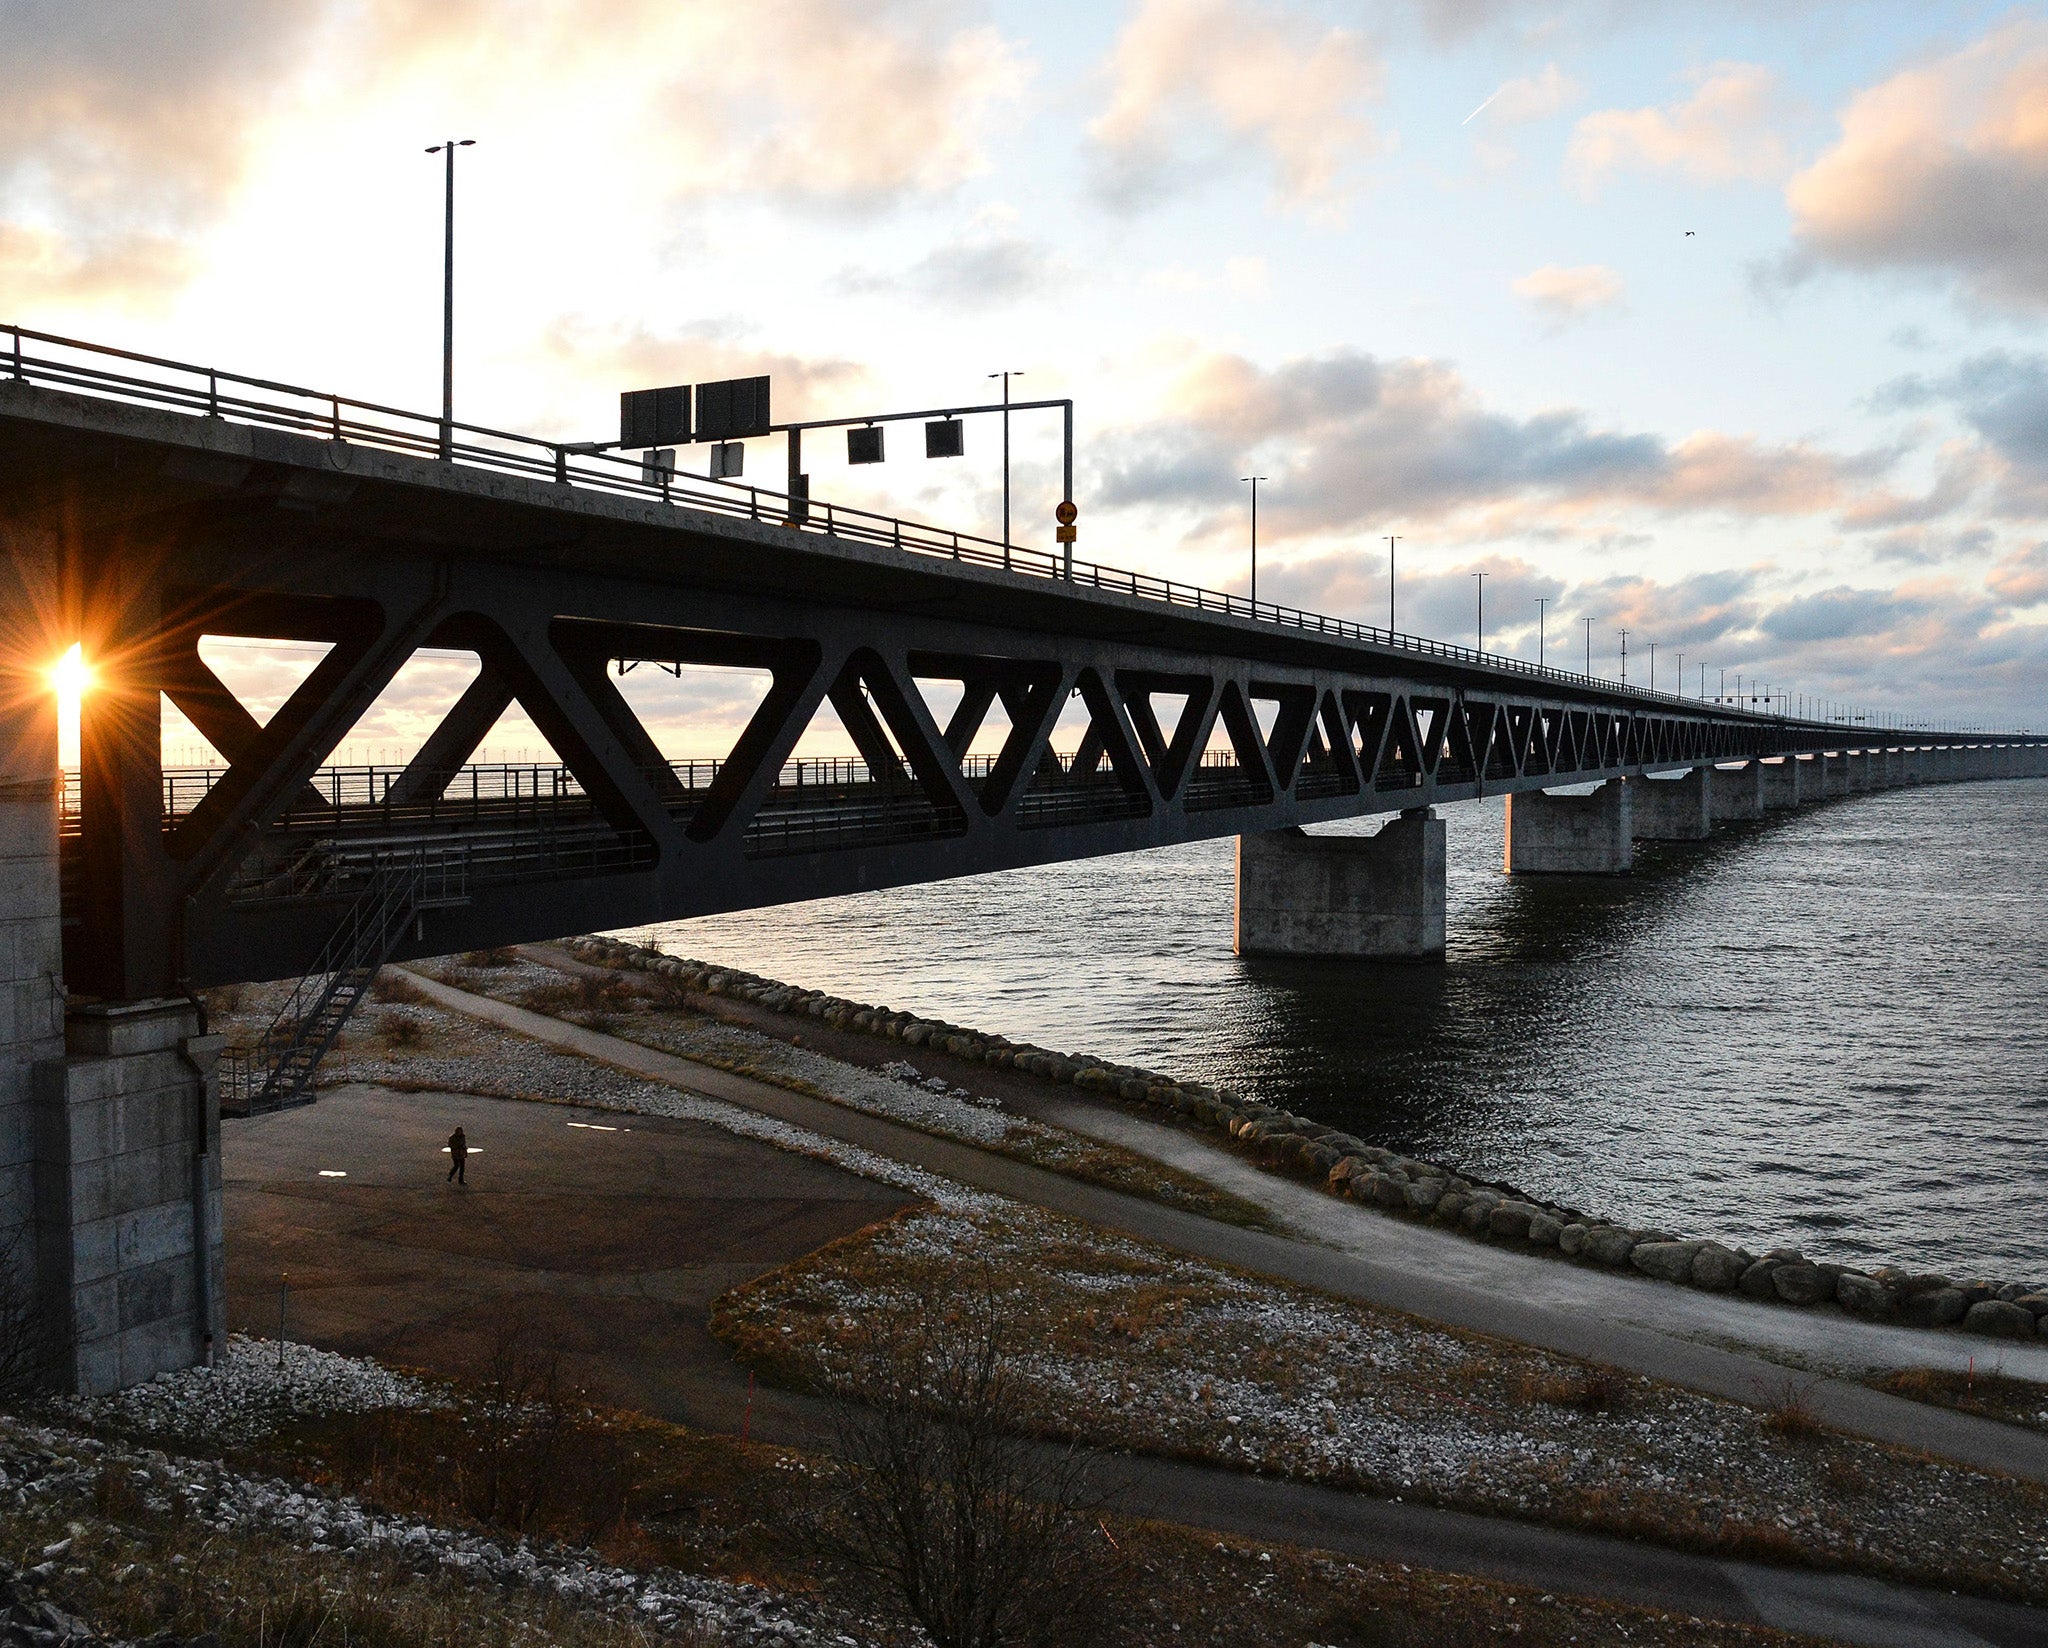 The Oresund Bridge between Sweden and Copenhagen which has provided easy travel between the two countries since the 1950s